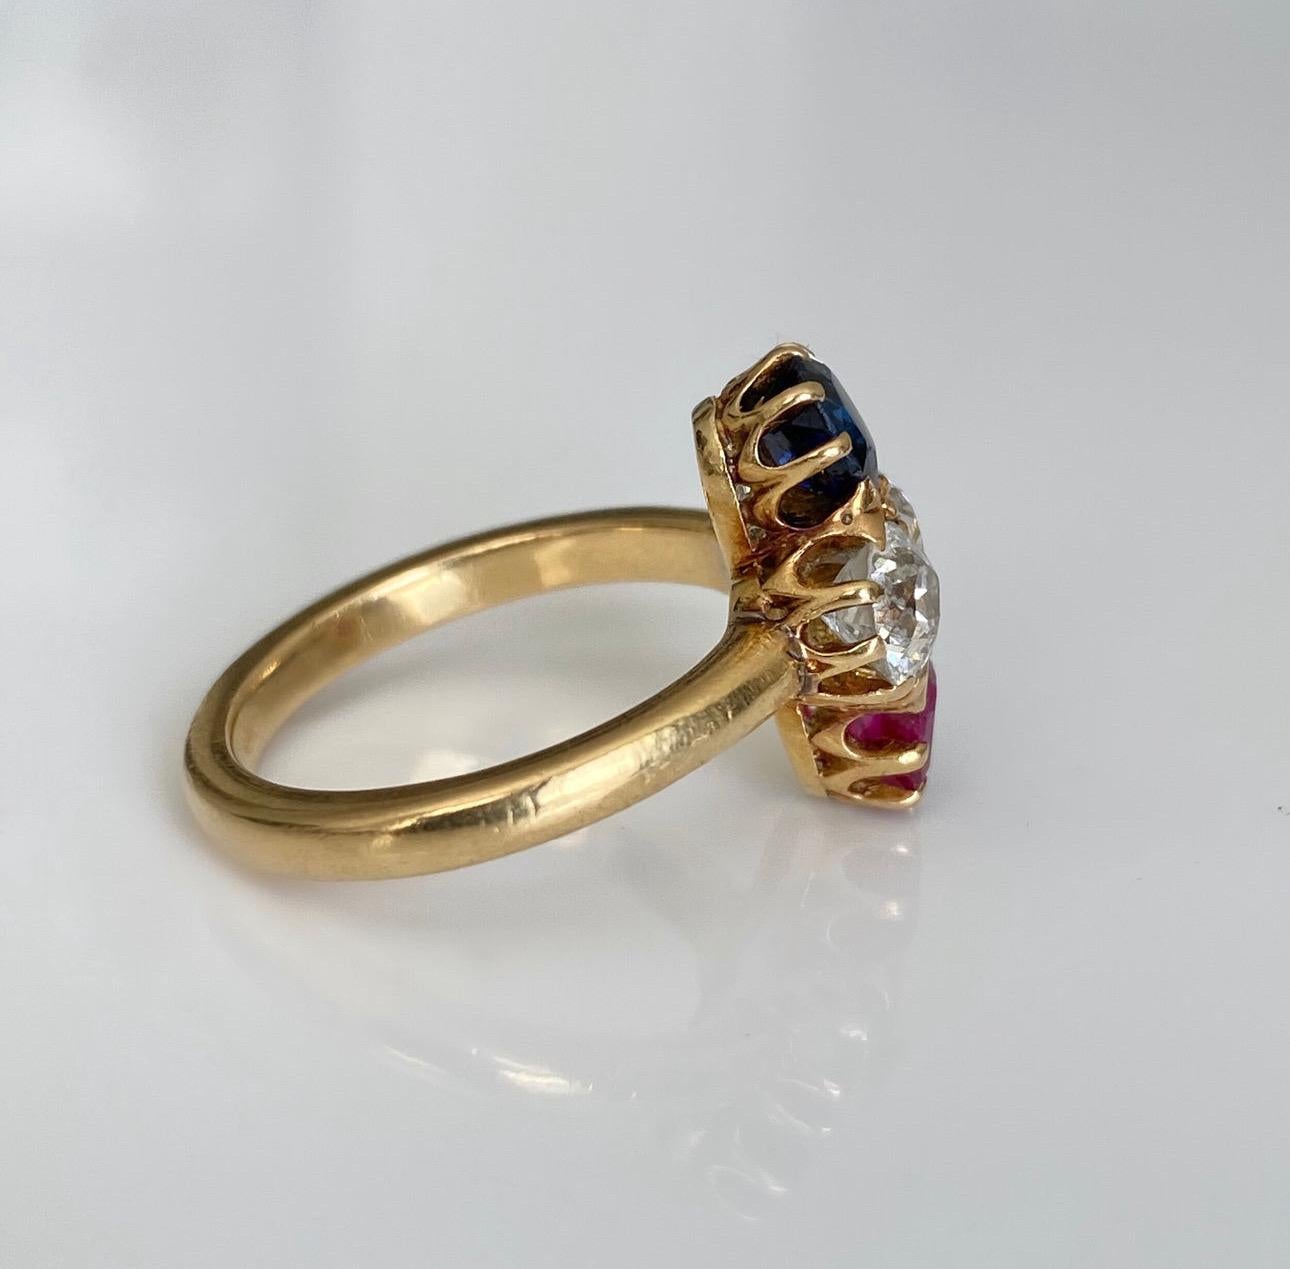 From the turn of the last century comes this charming quatrefoil ring. Featuring a gorgeous royal blue sapphire and a glowing Burmese ruby (both accompanied by a gemological report from AGL), each united by a pair of glittering old-cut diamonds,